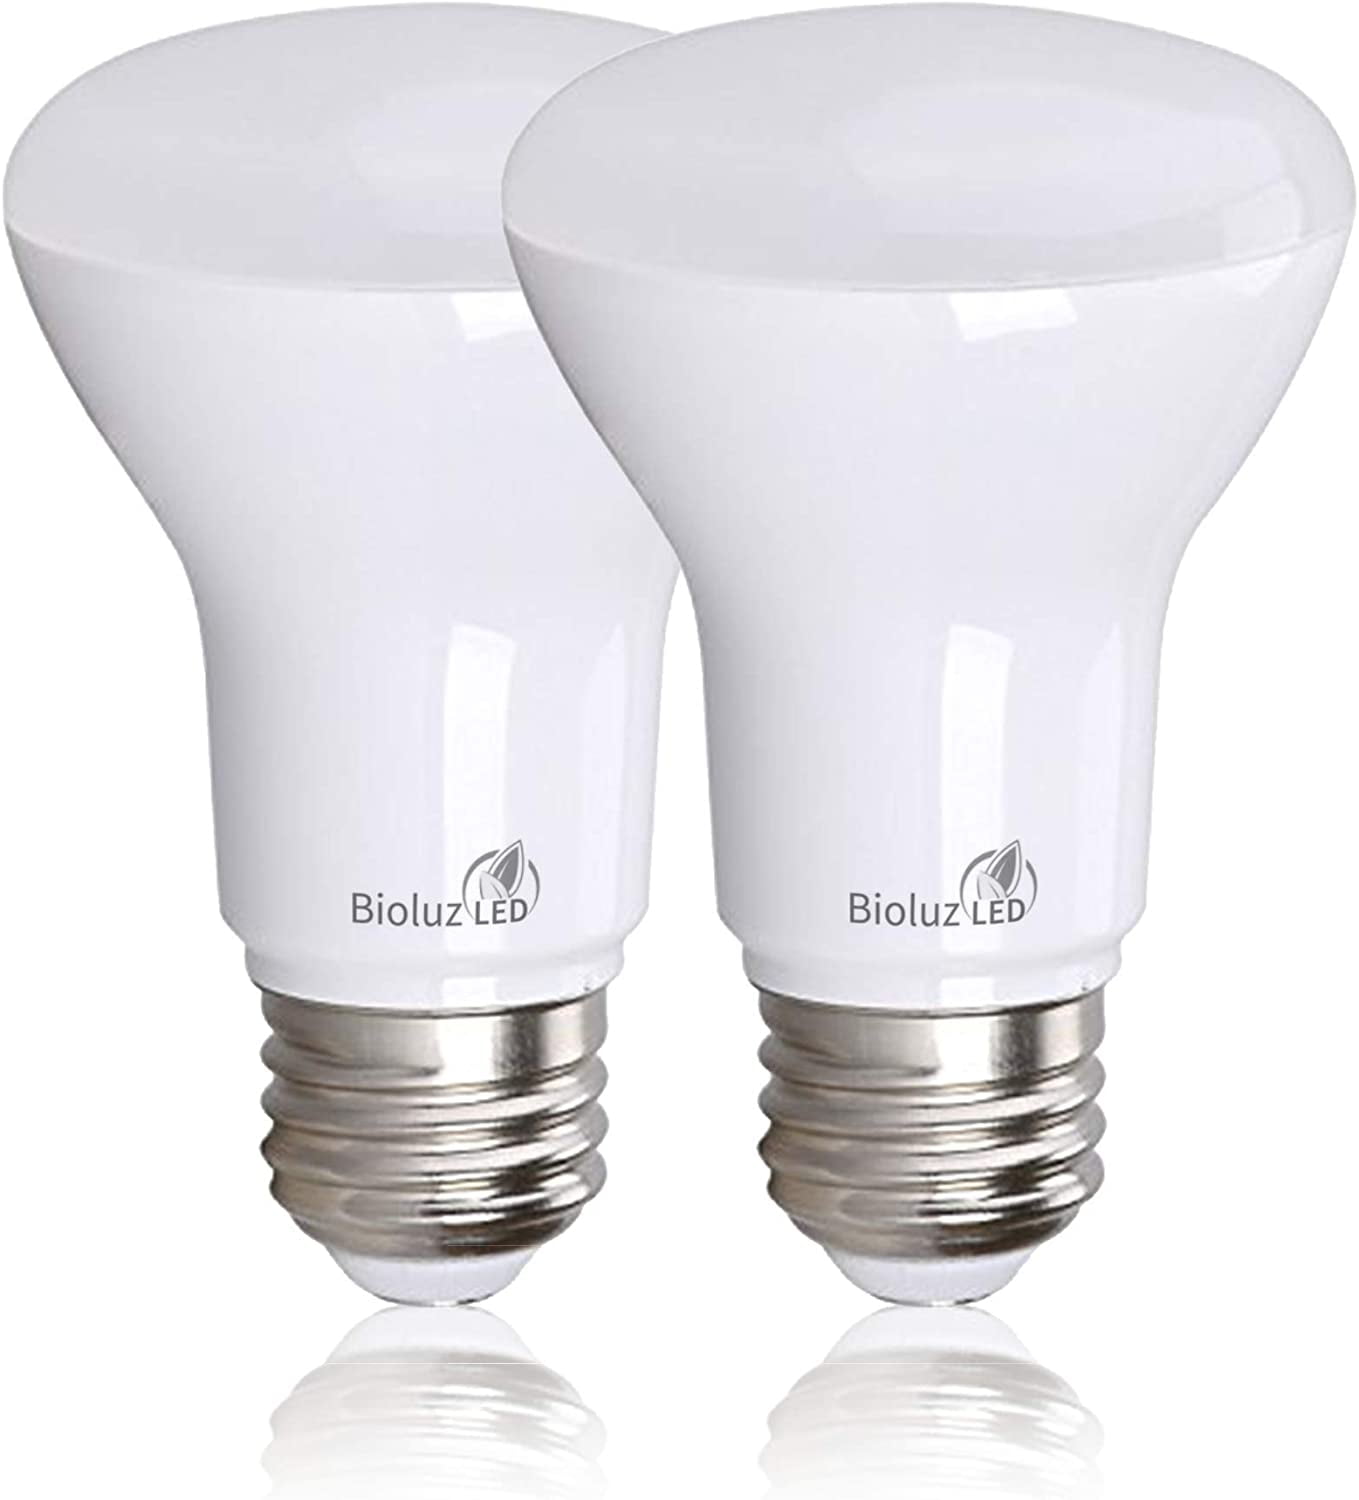 2 Pack R20 LED Bulb 90 CRI 3000K Bright Soft White 6W 50 Replacement 540 Indoor/Outdoor UL Listed CEC 20 Compliant (Pack of 2) -